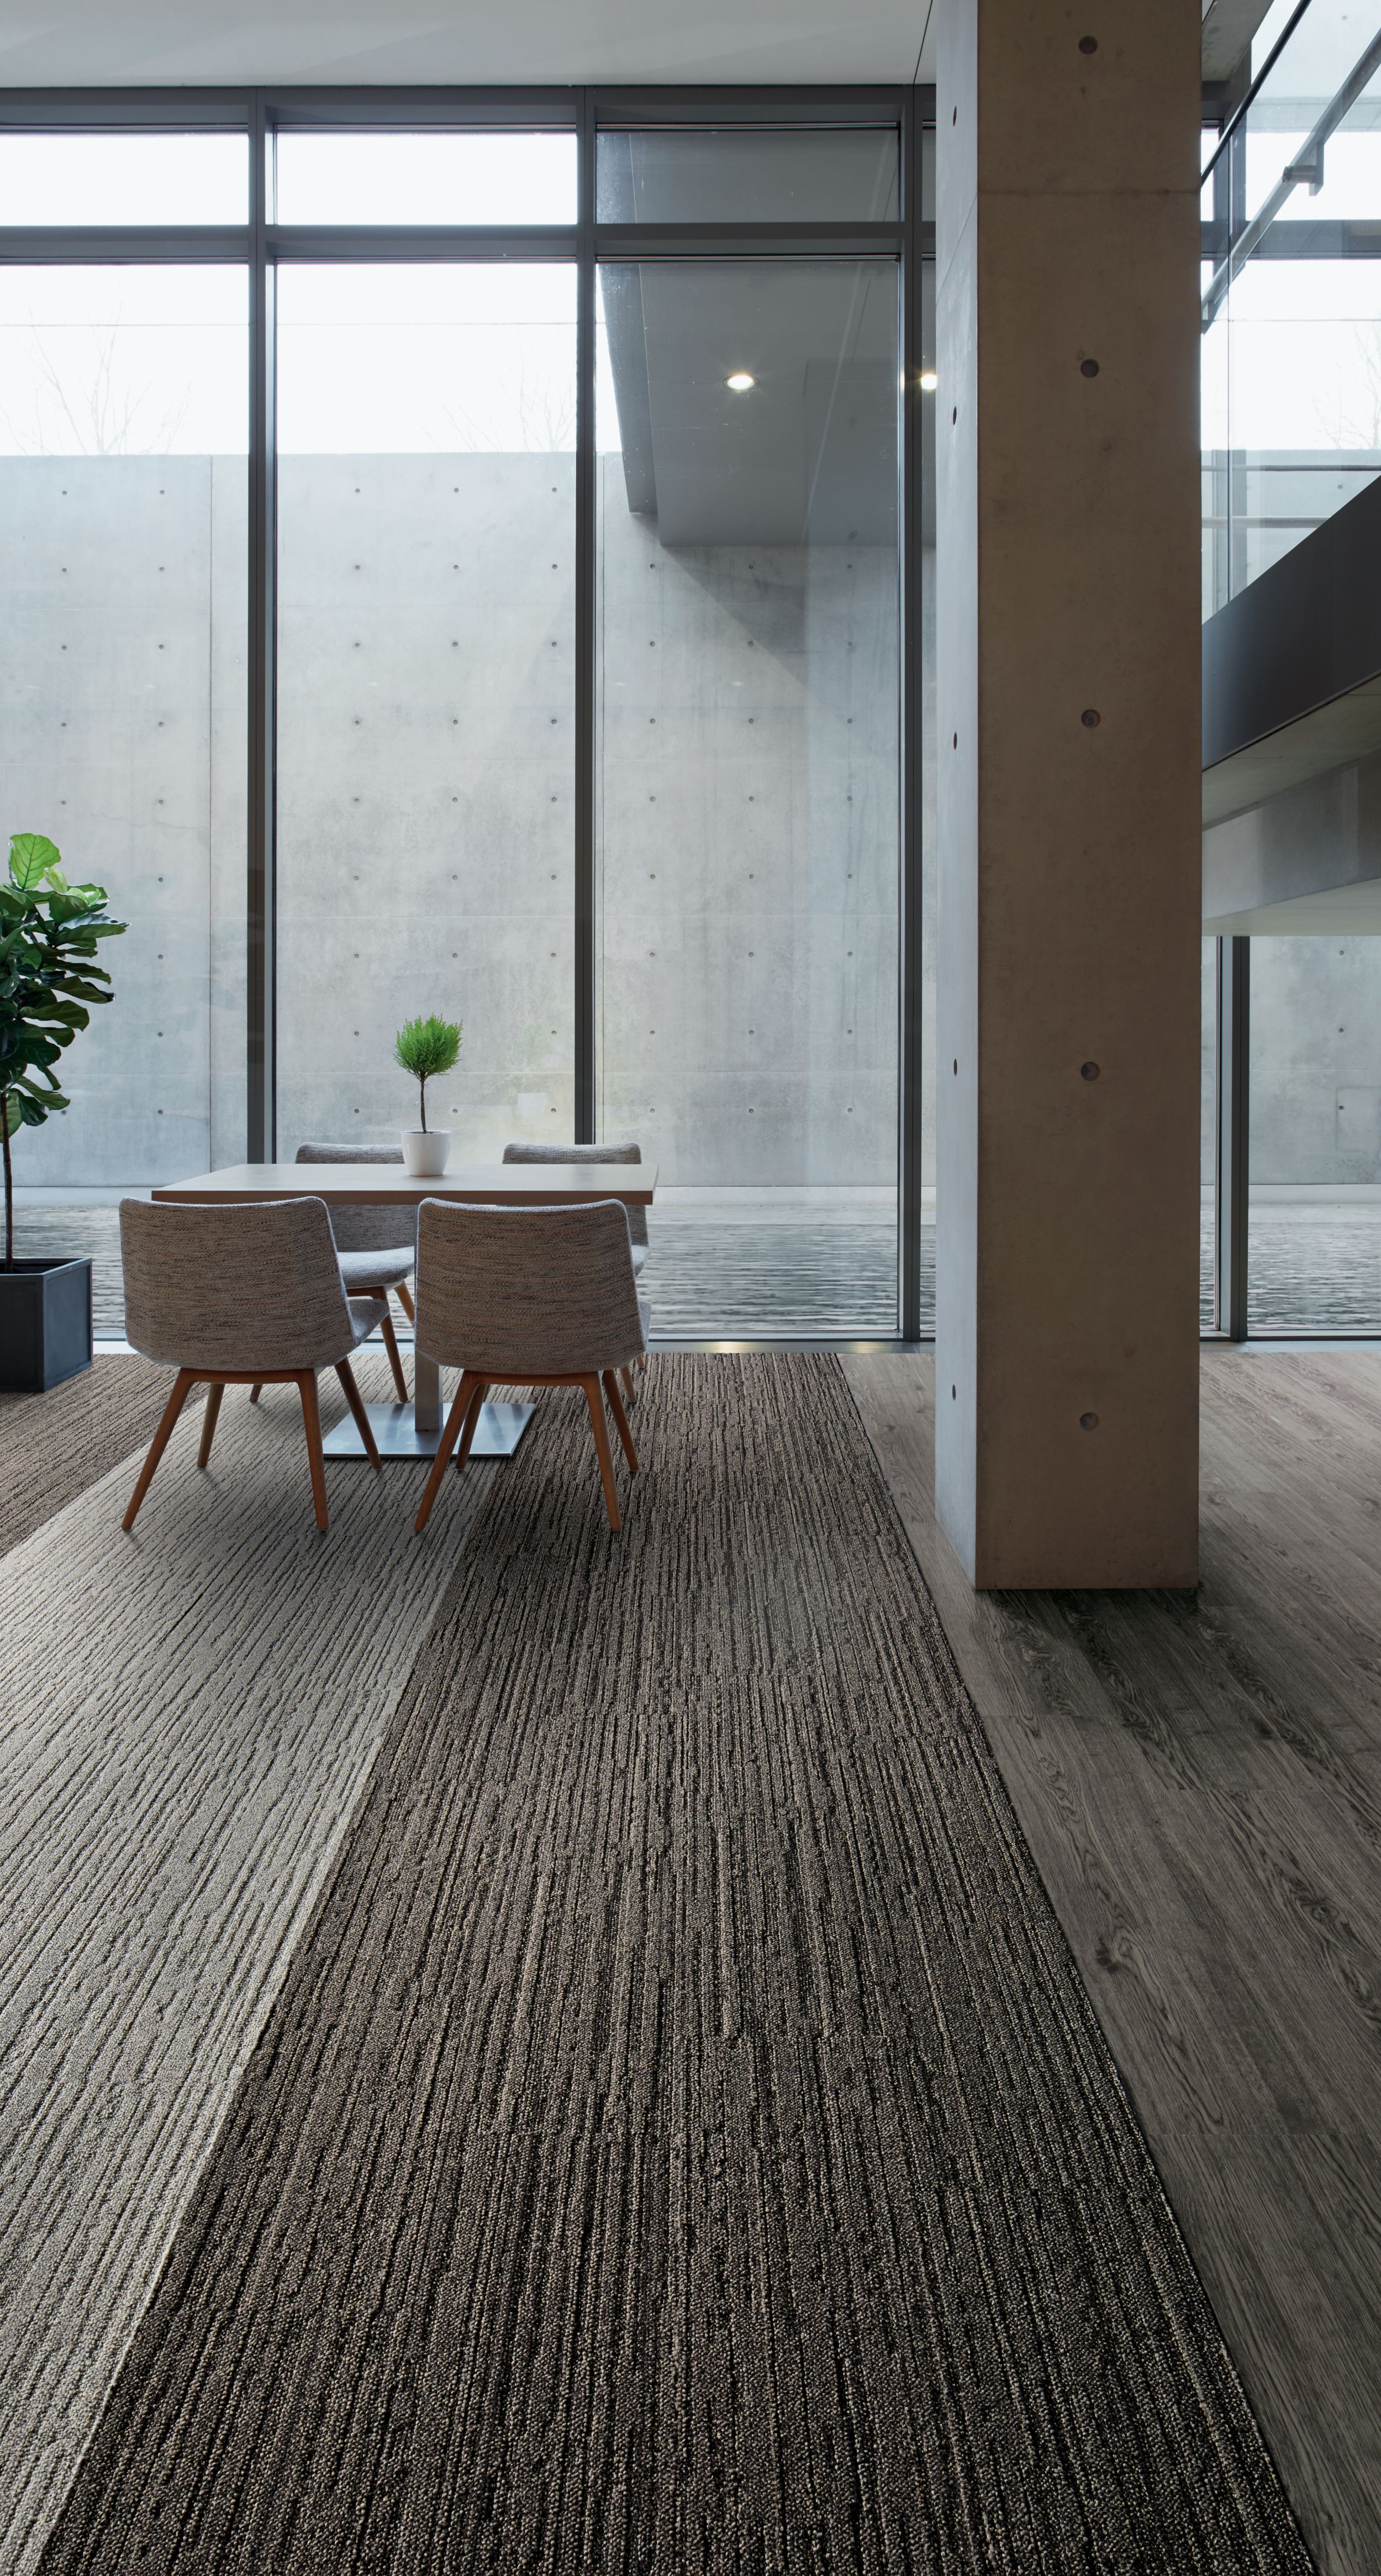 Interface WW880 plank carpet tile and Natural Woodgrains LVT in office common area afbeeldingnummer 2